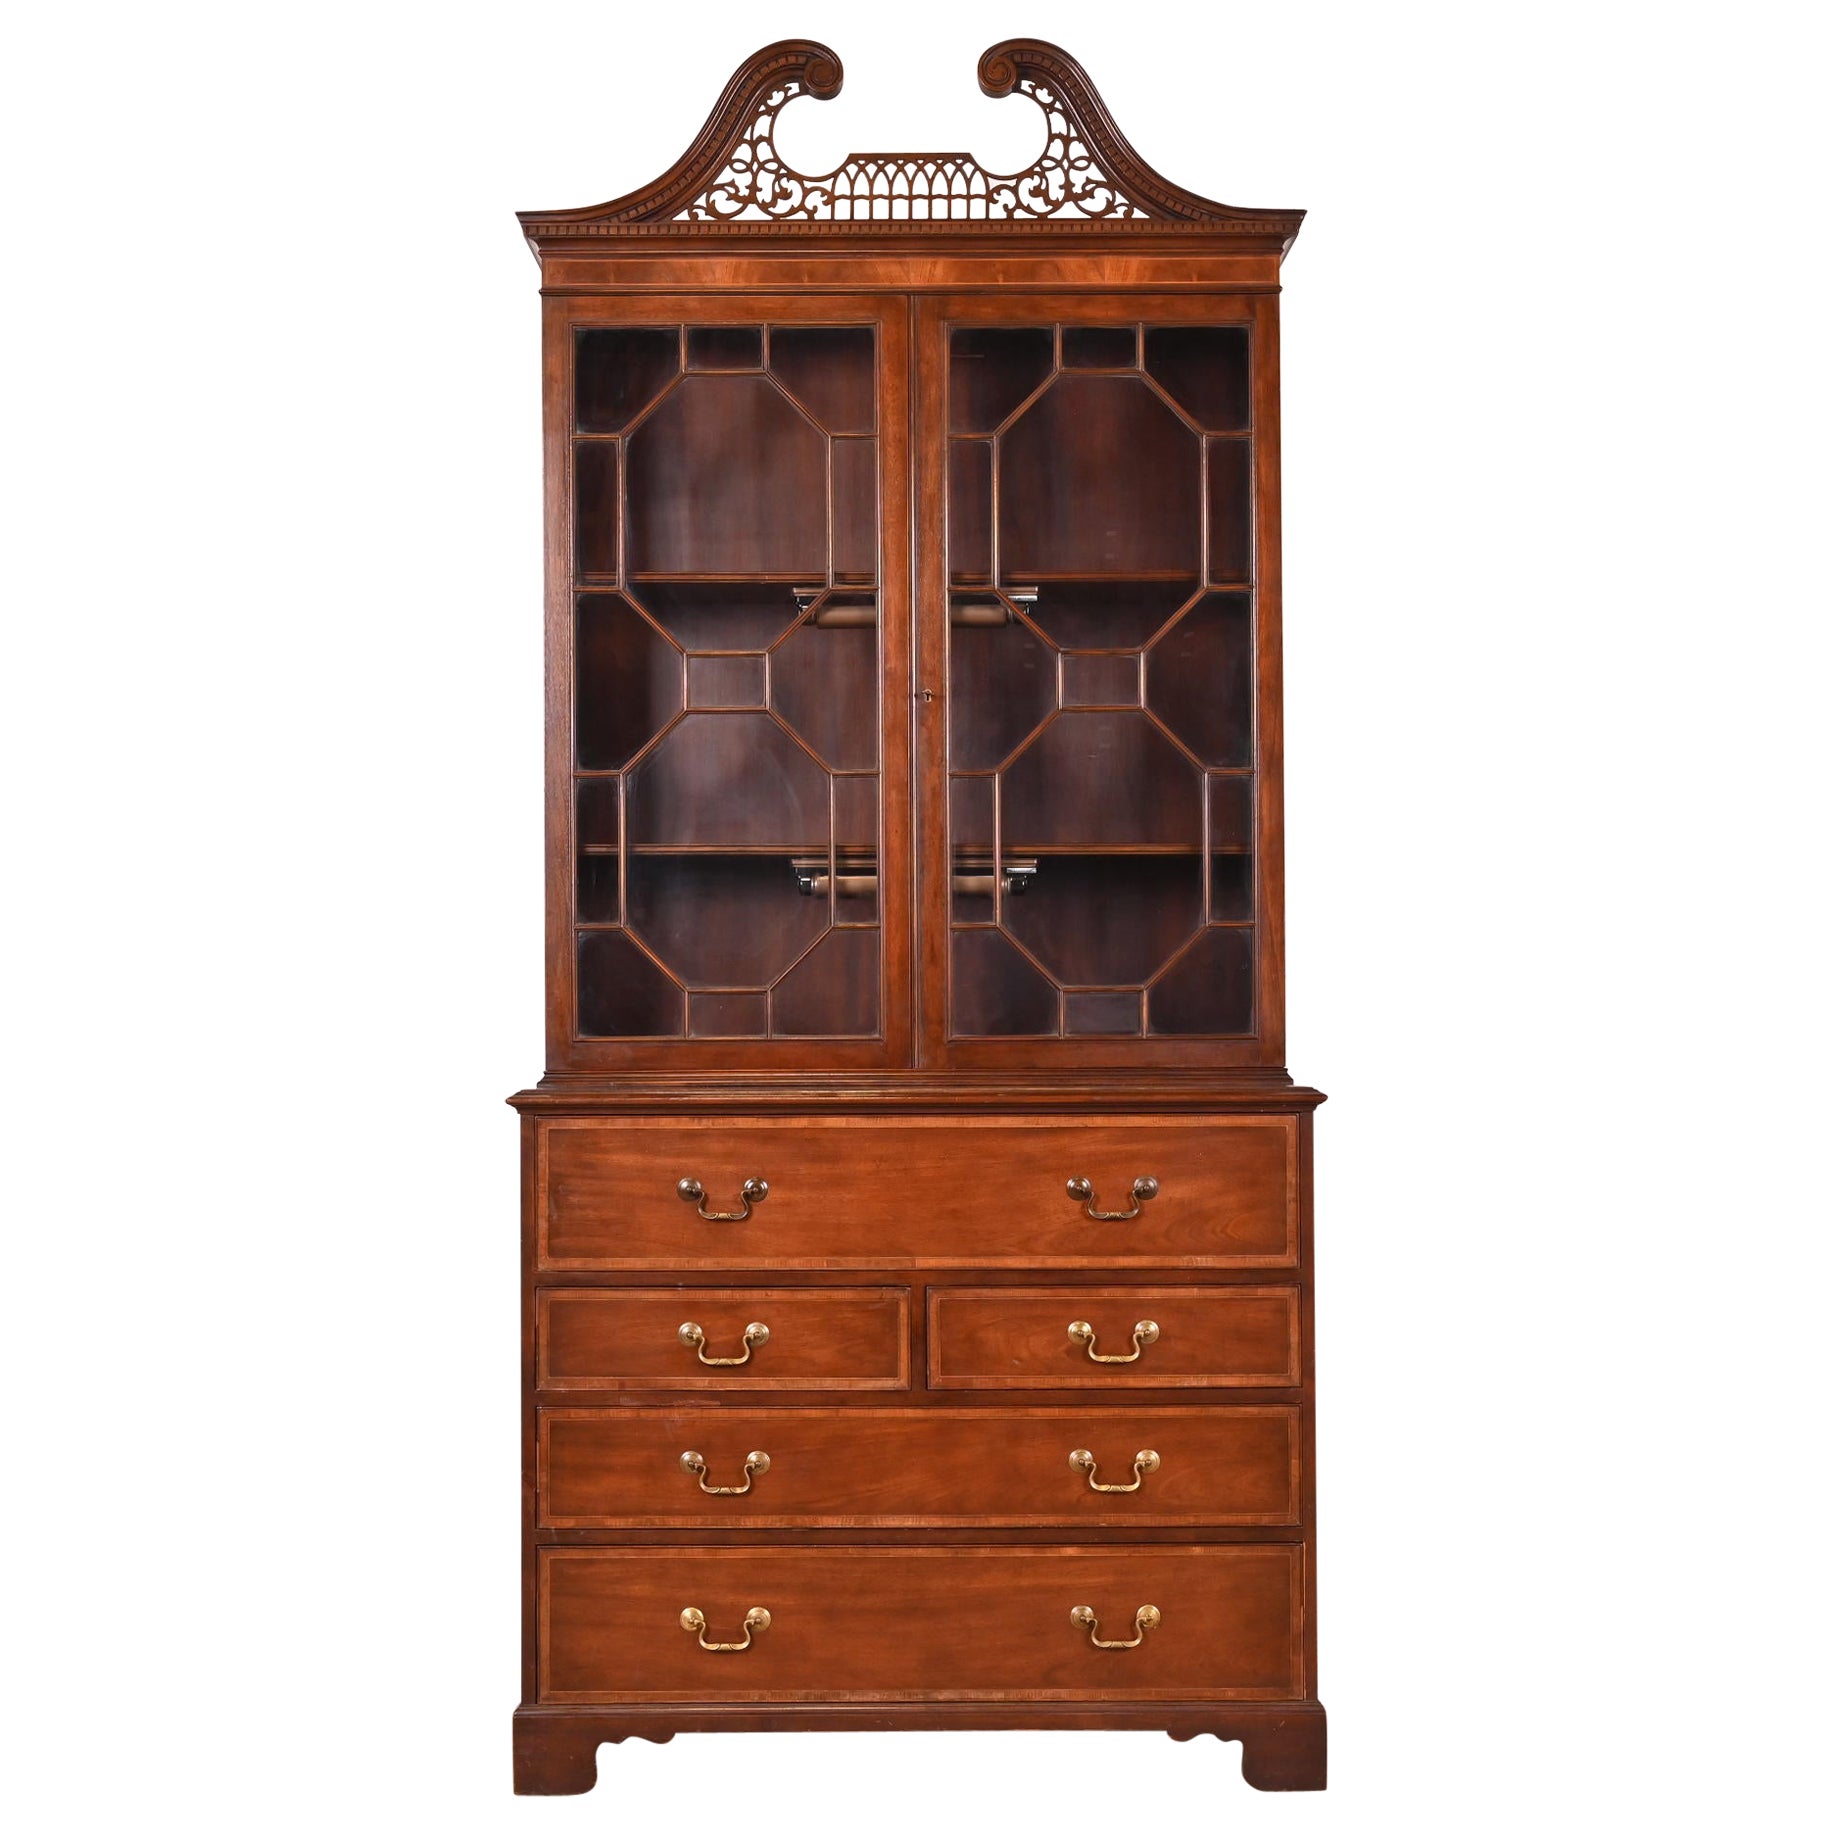 Baker Furniture Chippendale Mahogany Breakfront Bookcase with Secretary Desk